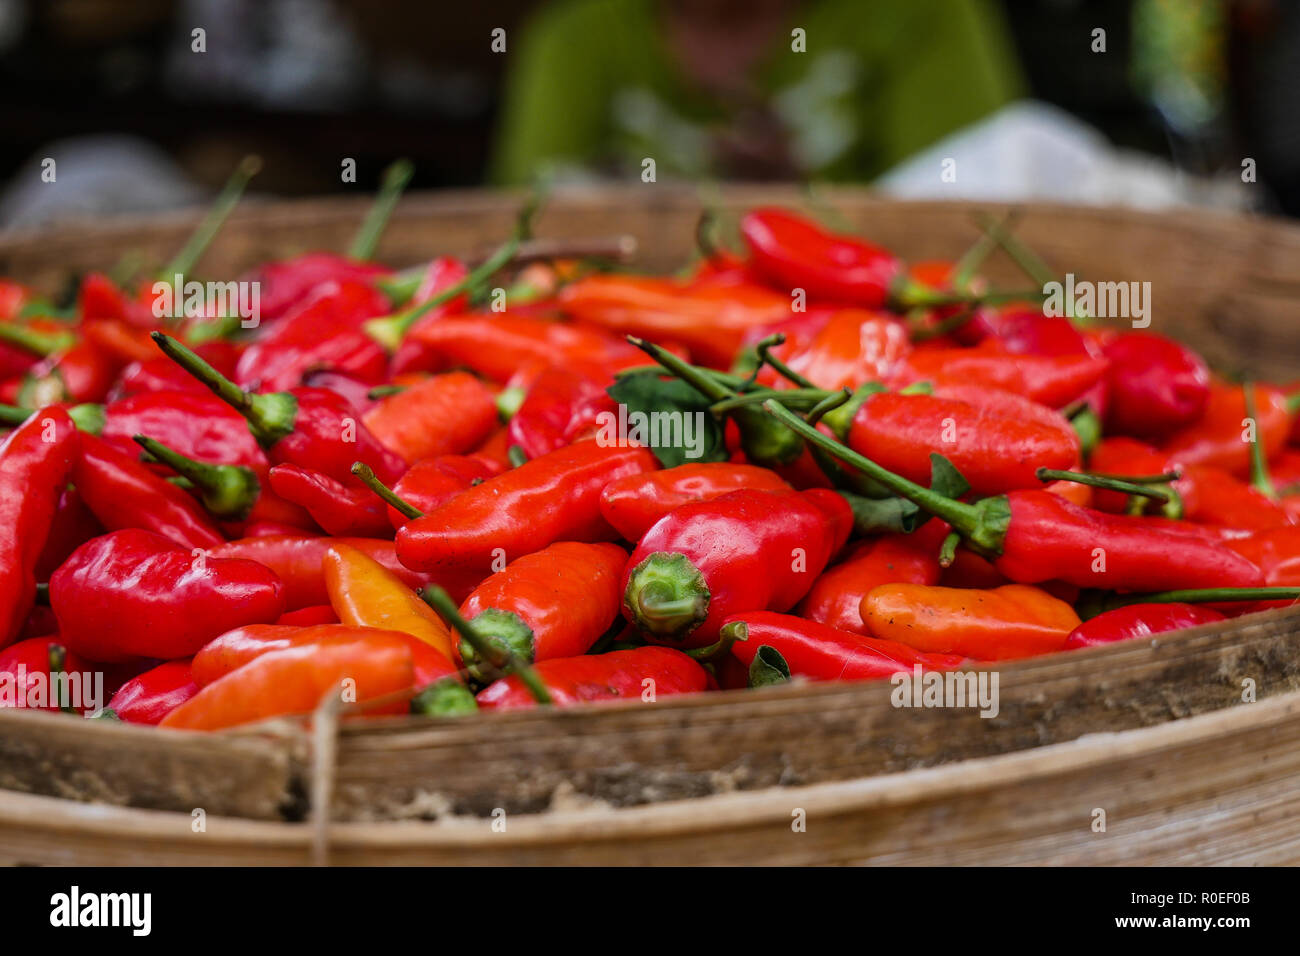 A wooden bowl filled with red chilis. Stock Photo